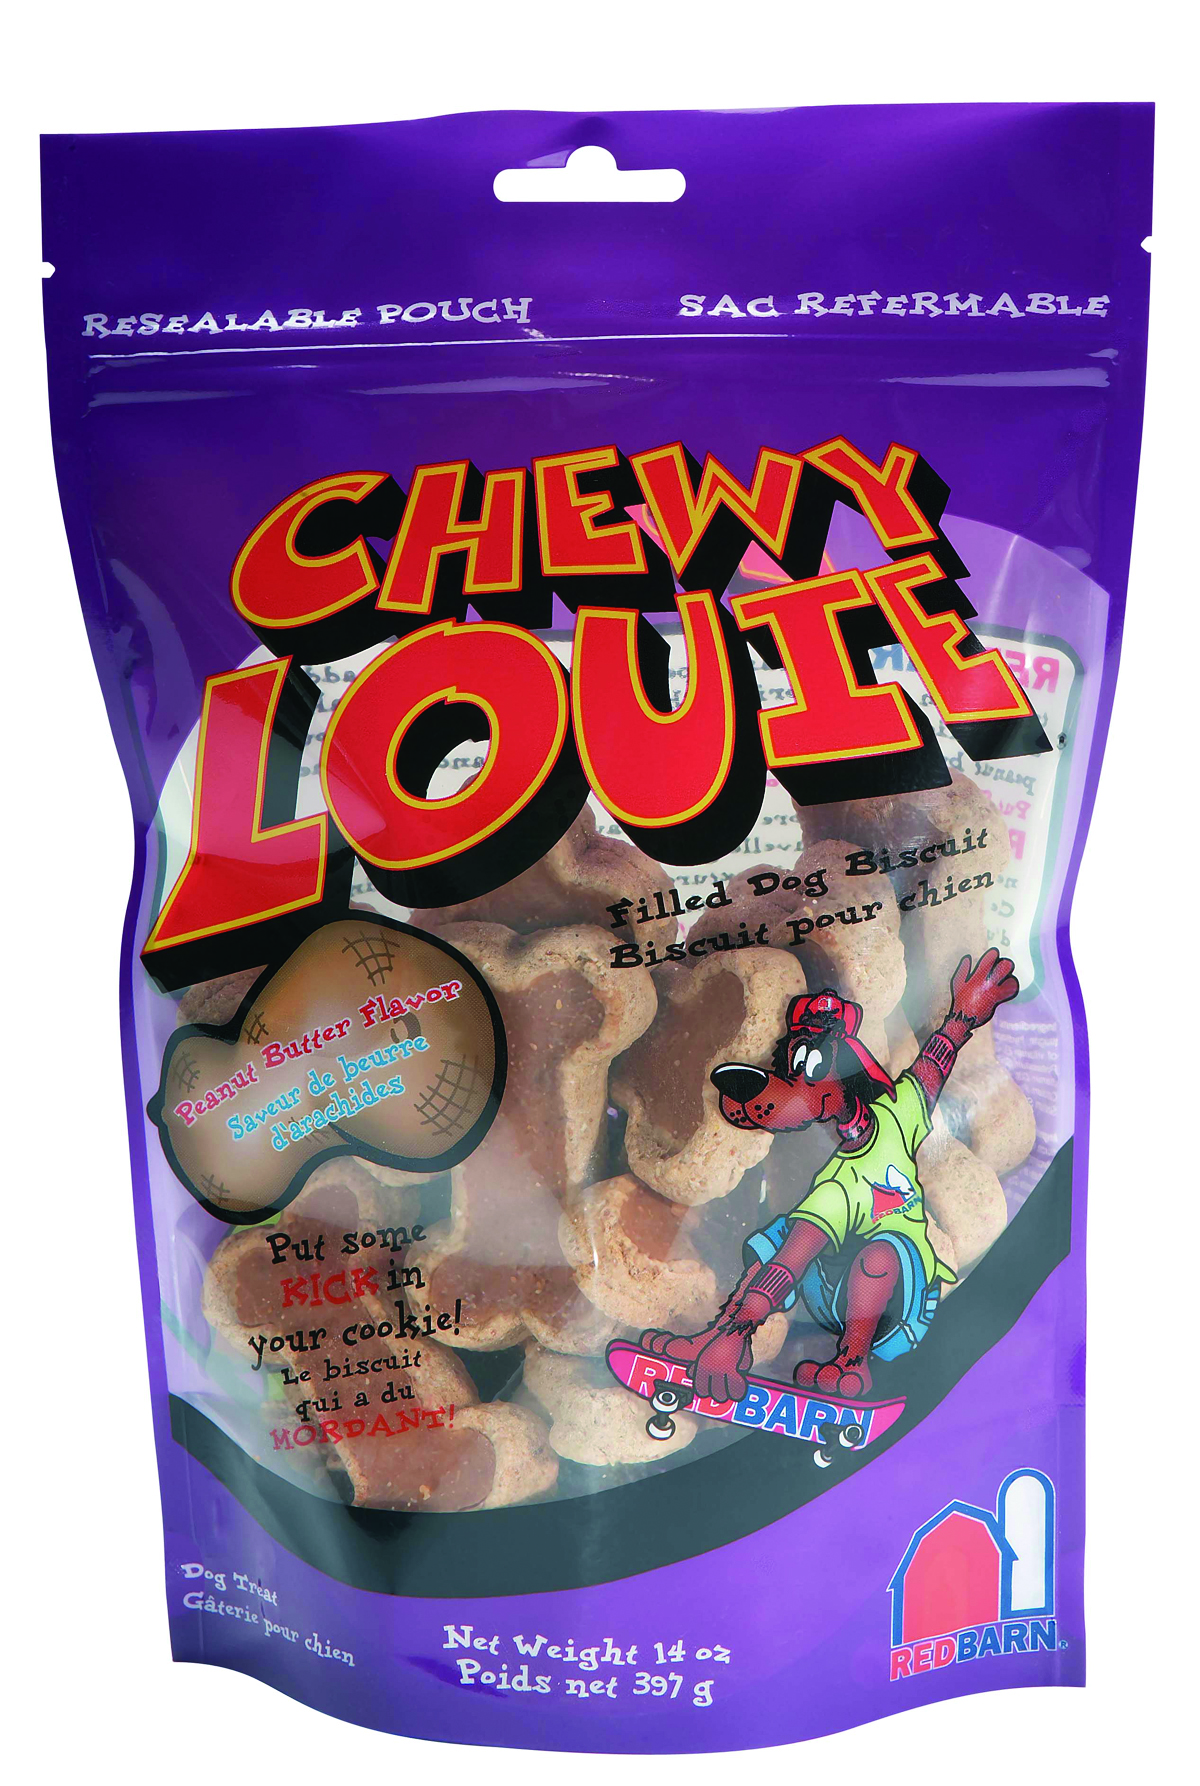 CHEWY LOUIE BISCUIT